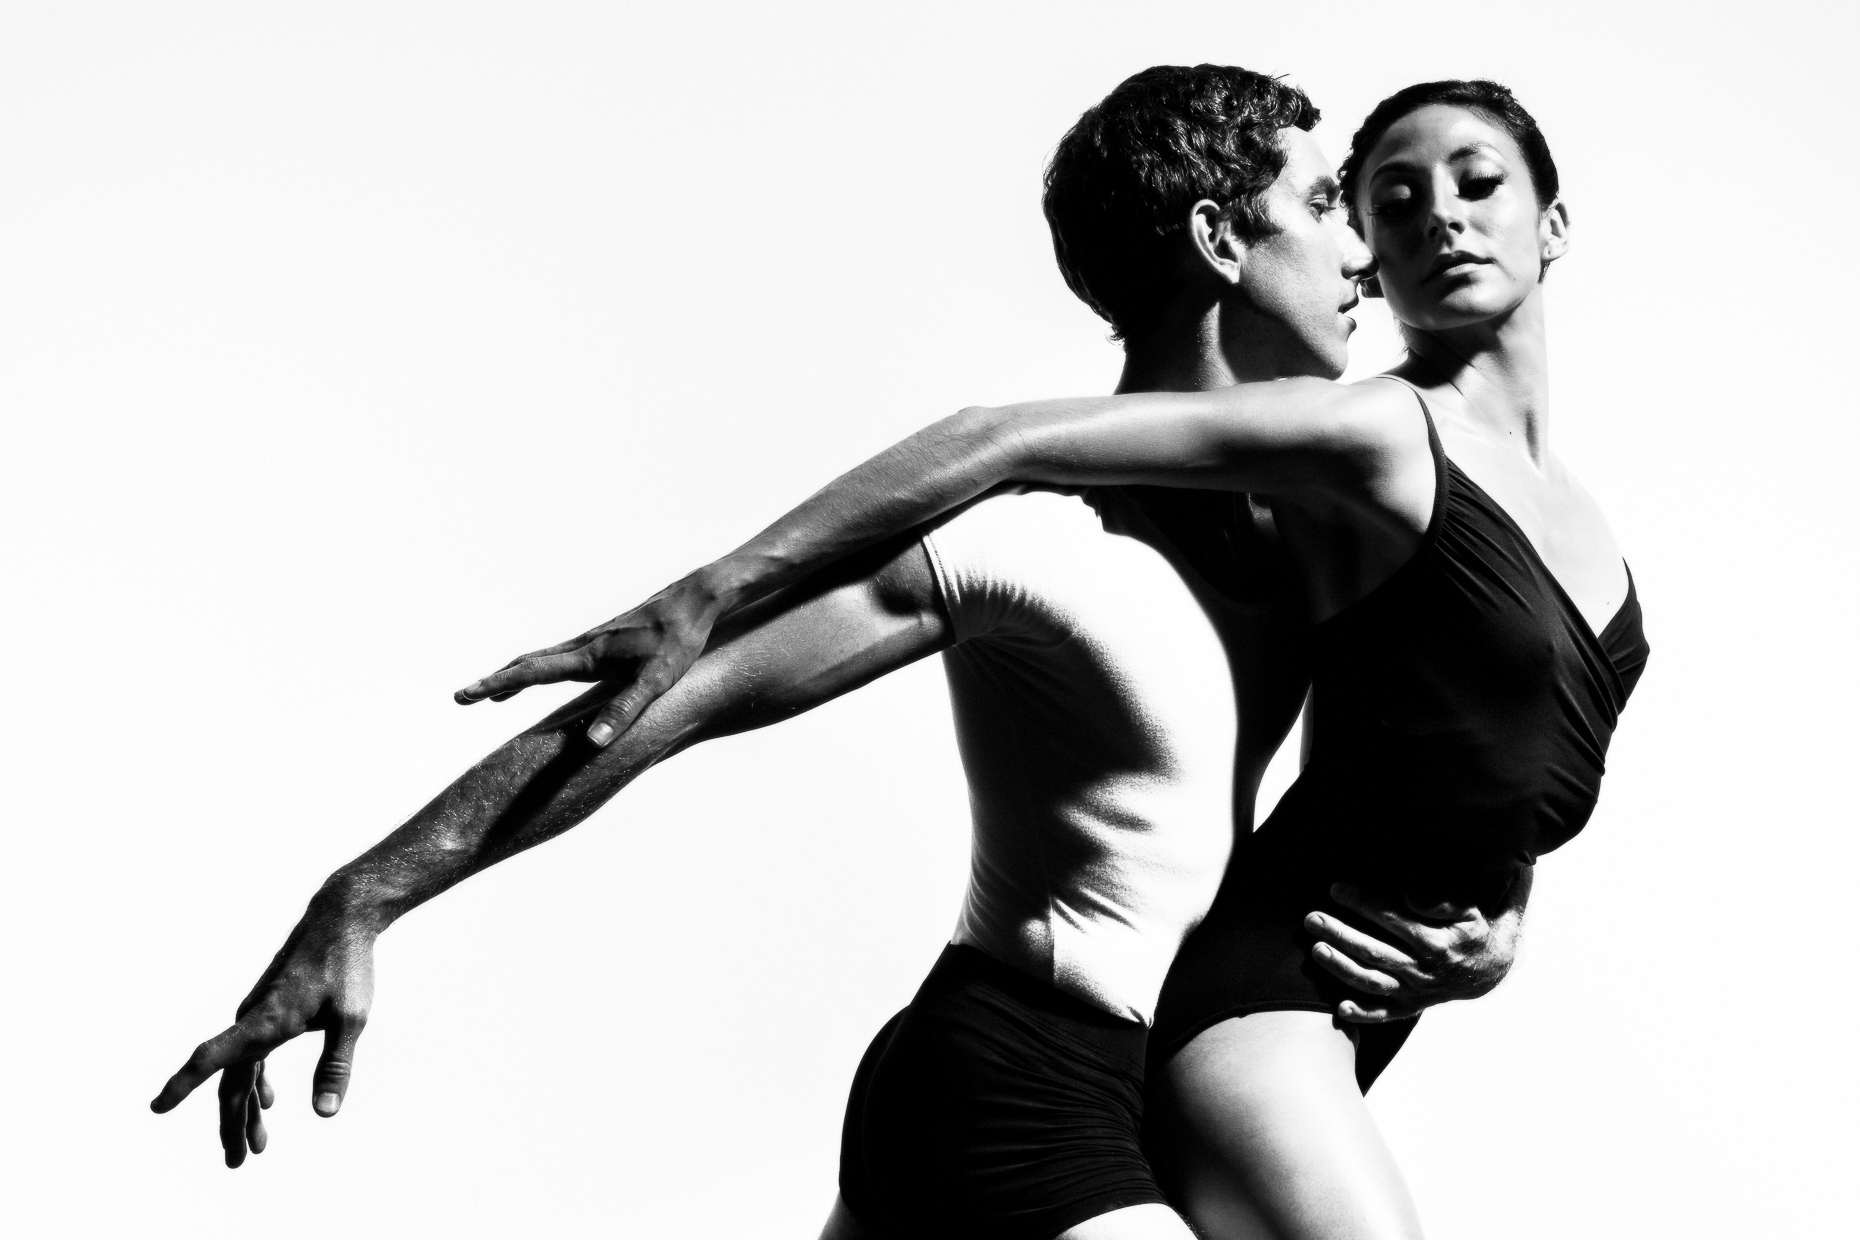 Oregon Ballet Theatre Silver Anniversary dancers Brian Simcoe and Martina Chavez by Andy Batt. Brian holds Martina tightly and gracefully.